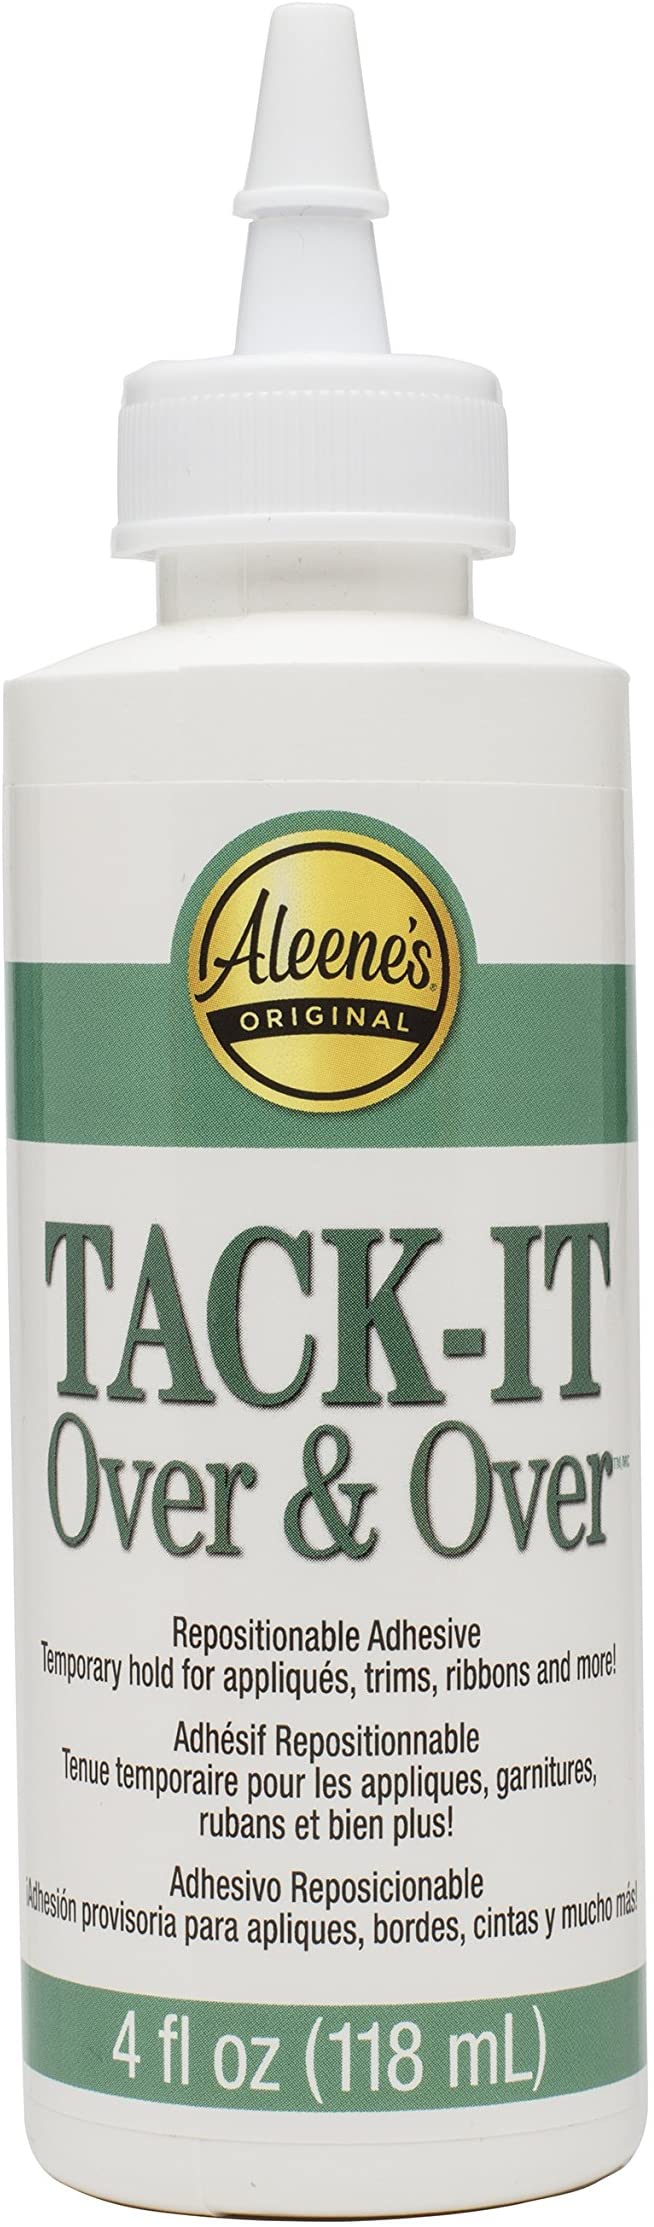 ALEENE'S TACK-IT OVER AND OVER 4 OZ